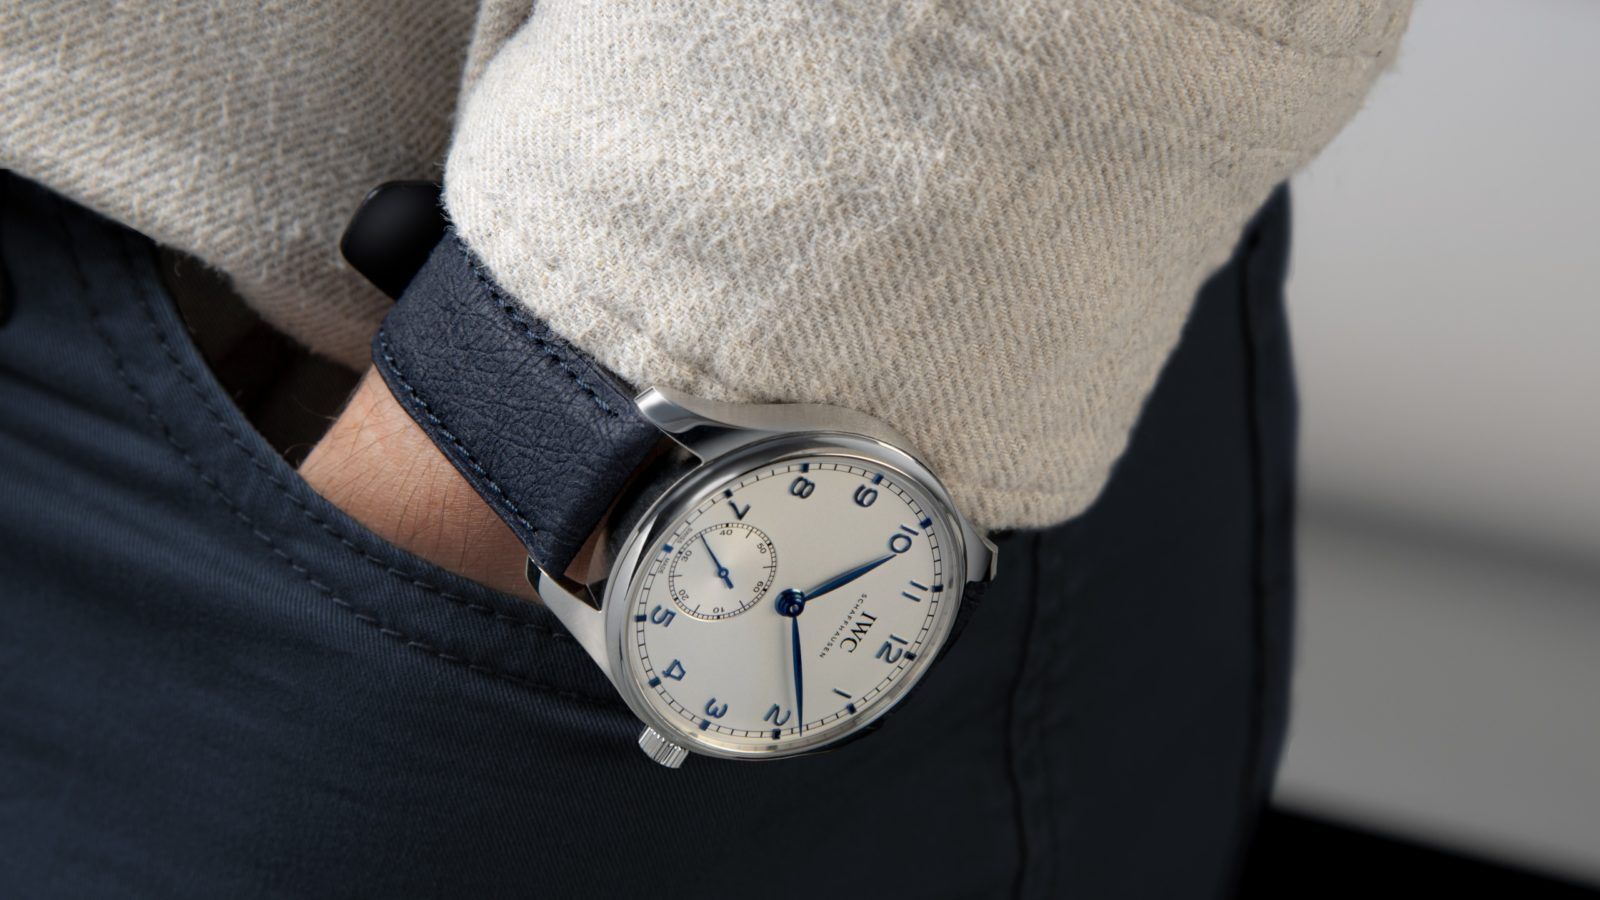 IWC caters to the eco-conscious with new paper-based straps